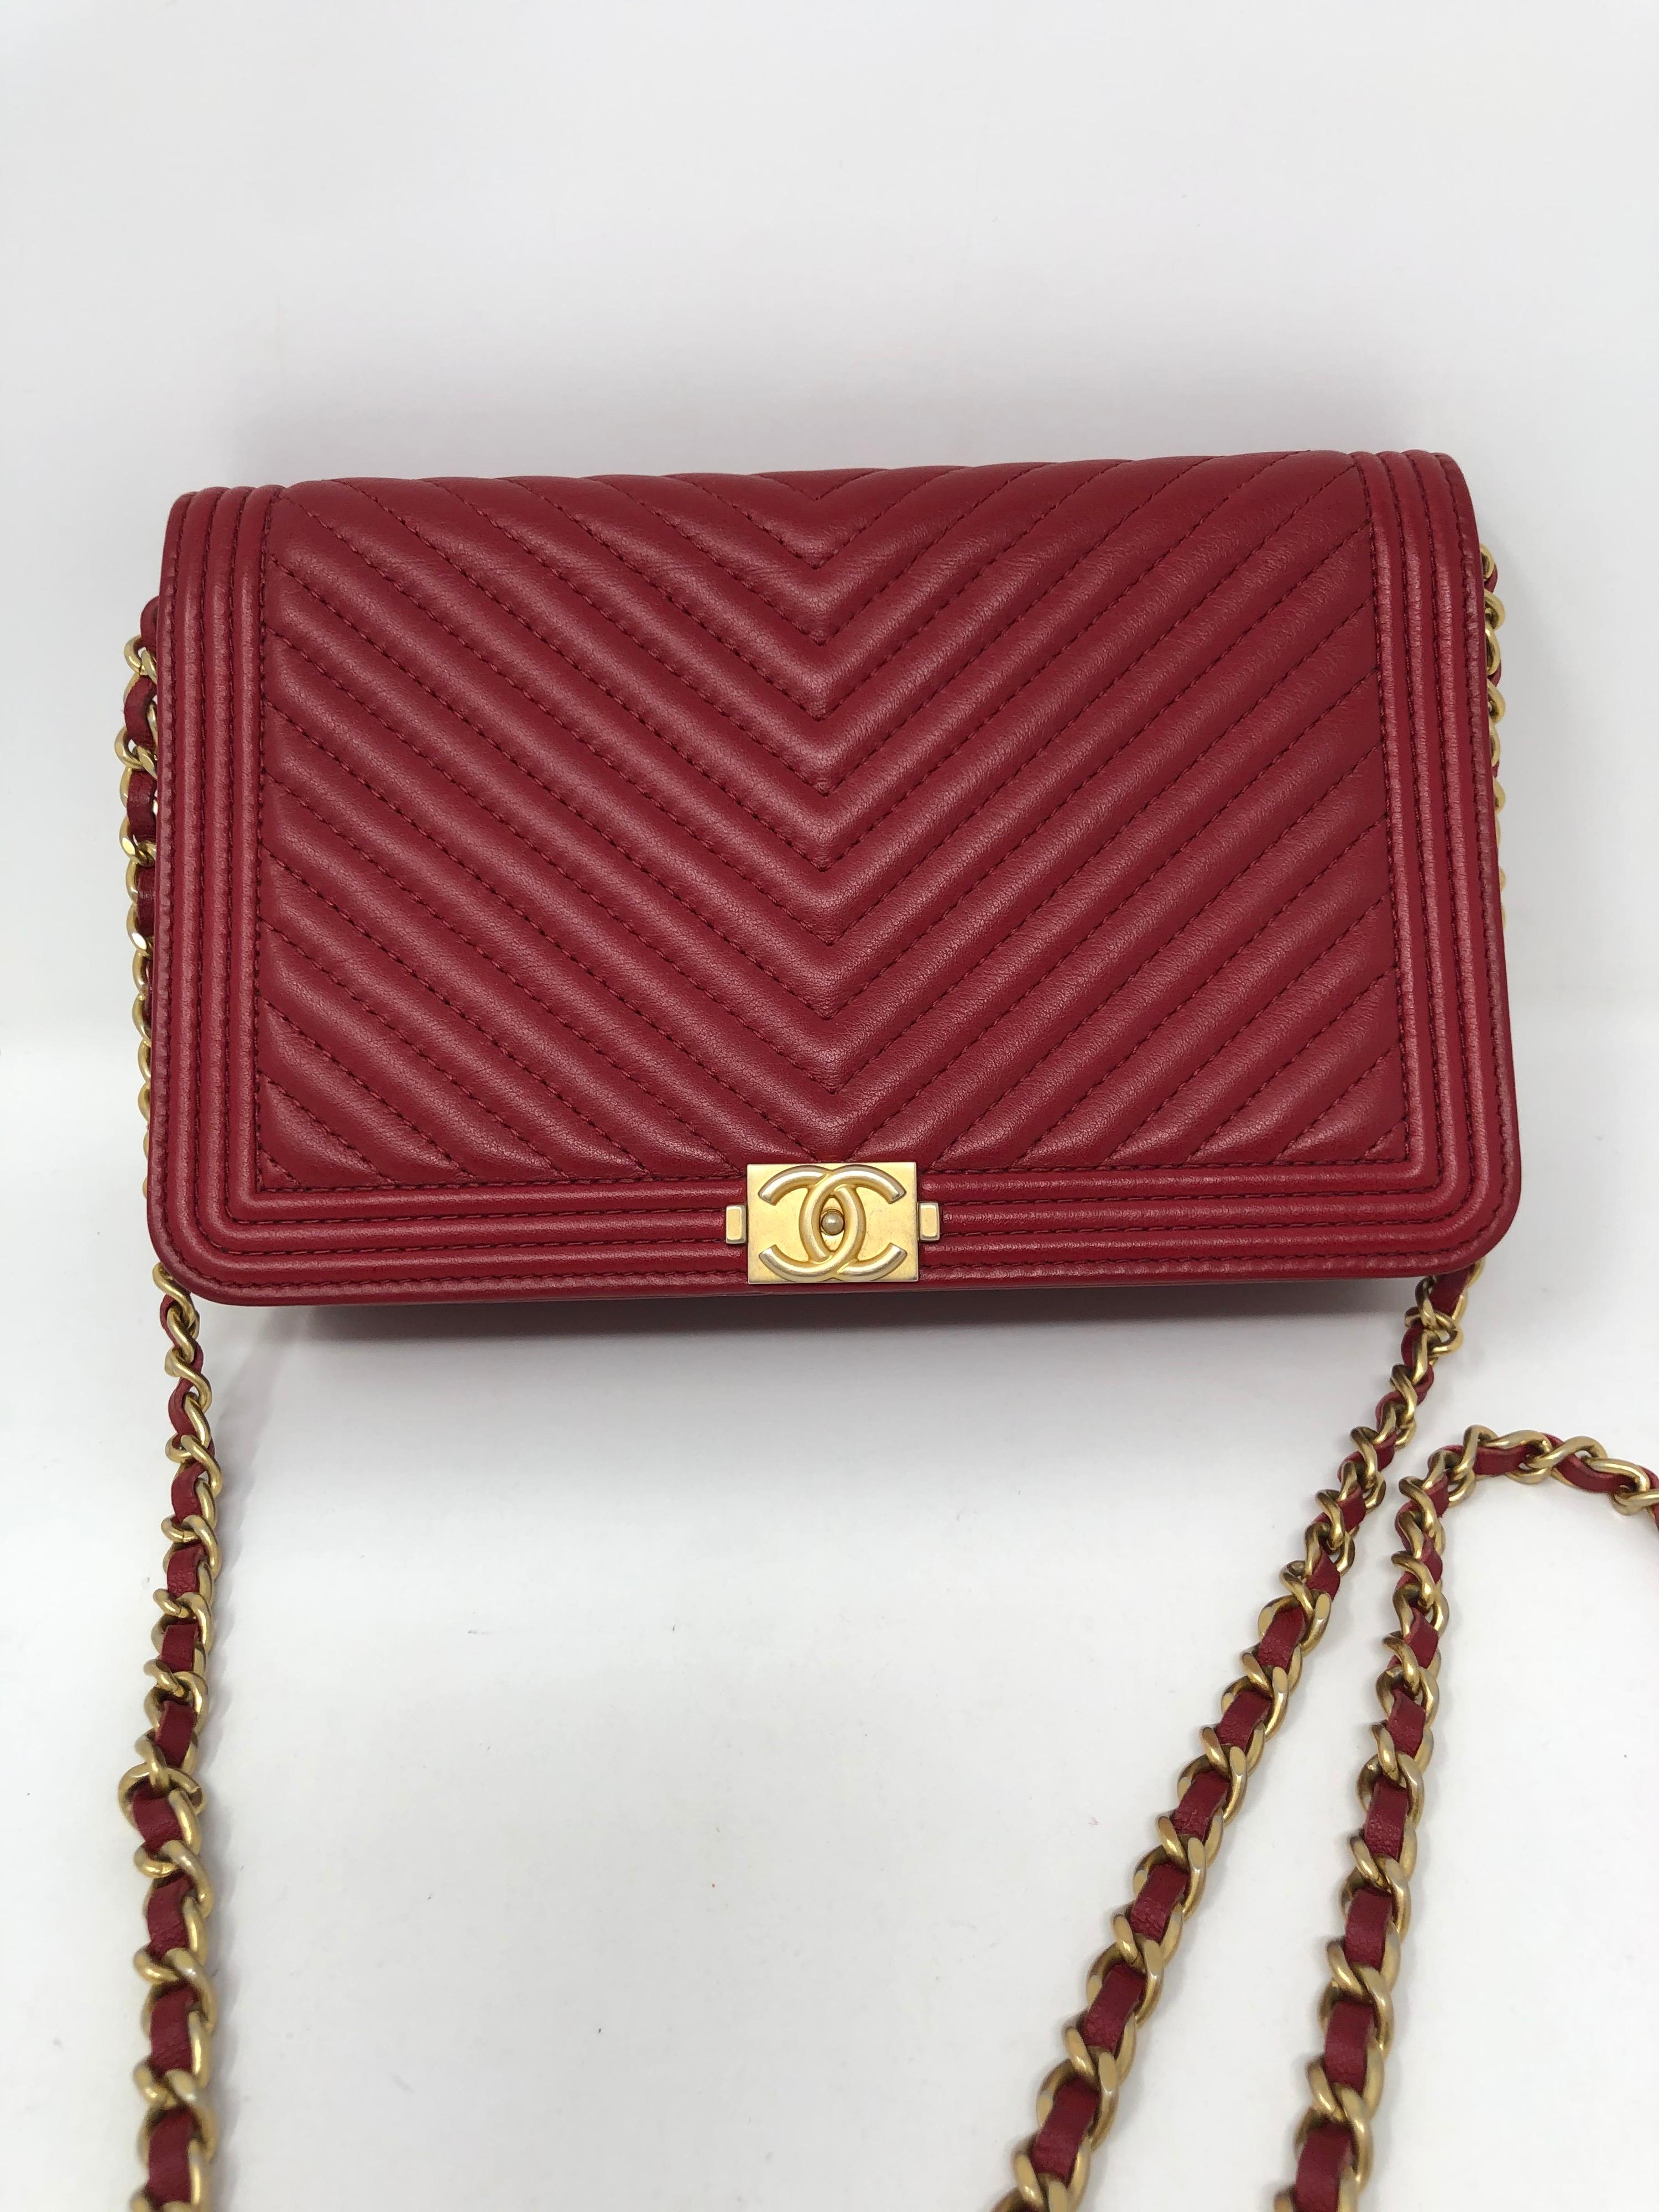 Chanel Red Boy Wallet On A Chain Bag. Gold hardware. Excellent condition. Crossbody or clutch. Chevron pattern. Guaranteed authentic. Includes dust cover 